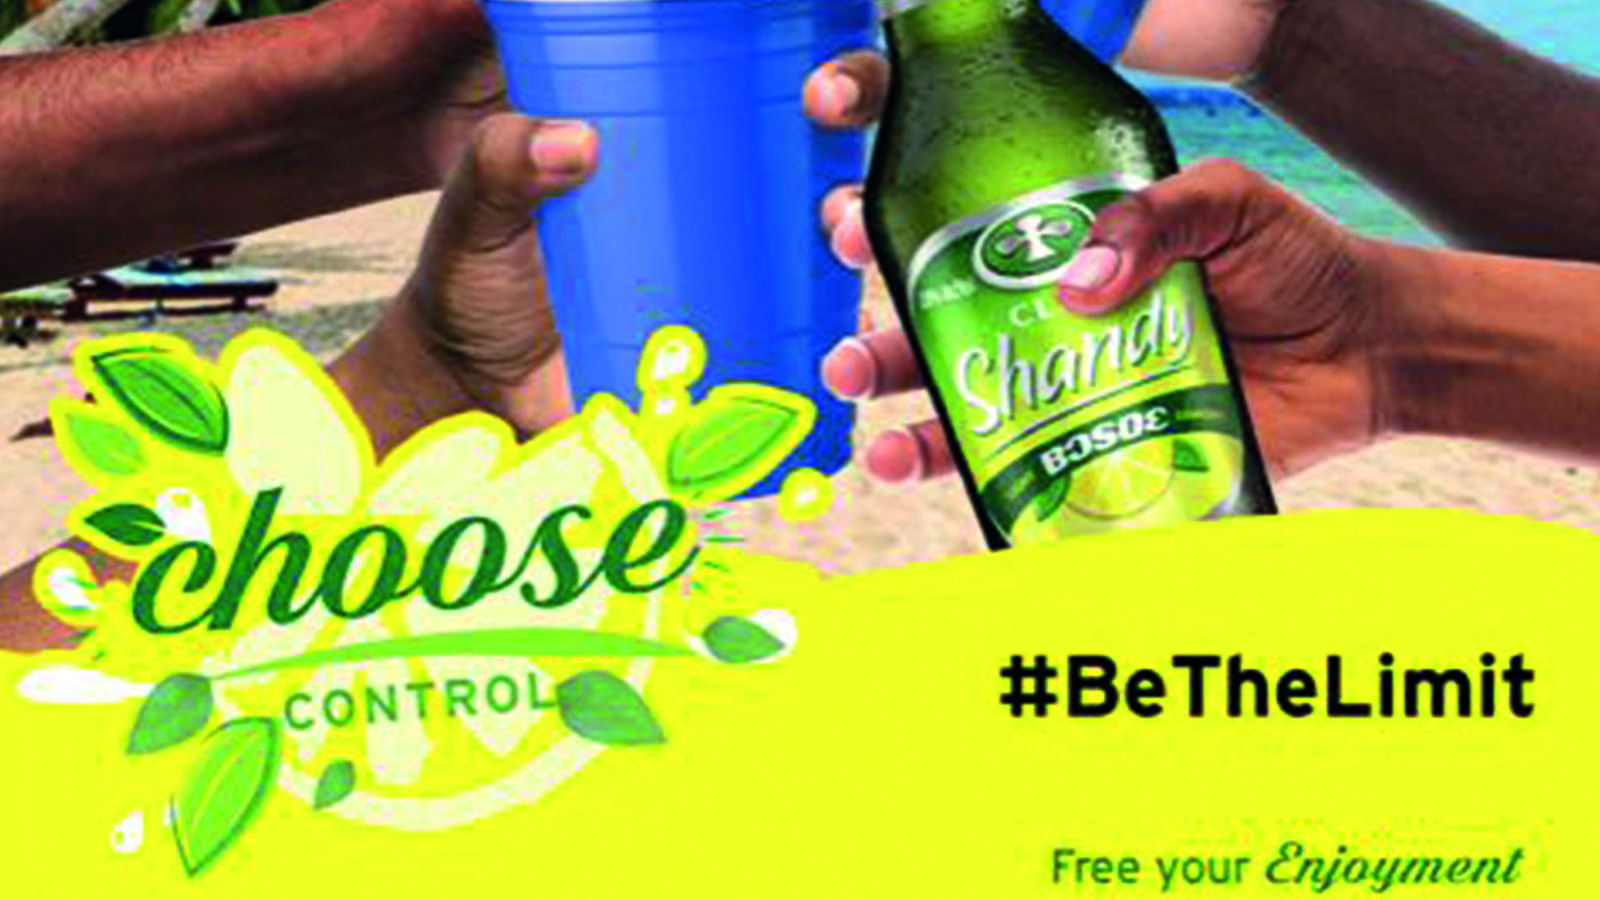 AB InBev’s subsidiary in Ghana ABL champions responsible drinking in new campaign